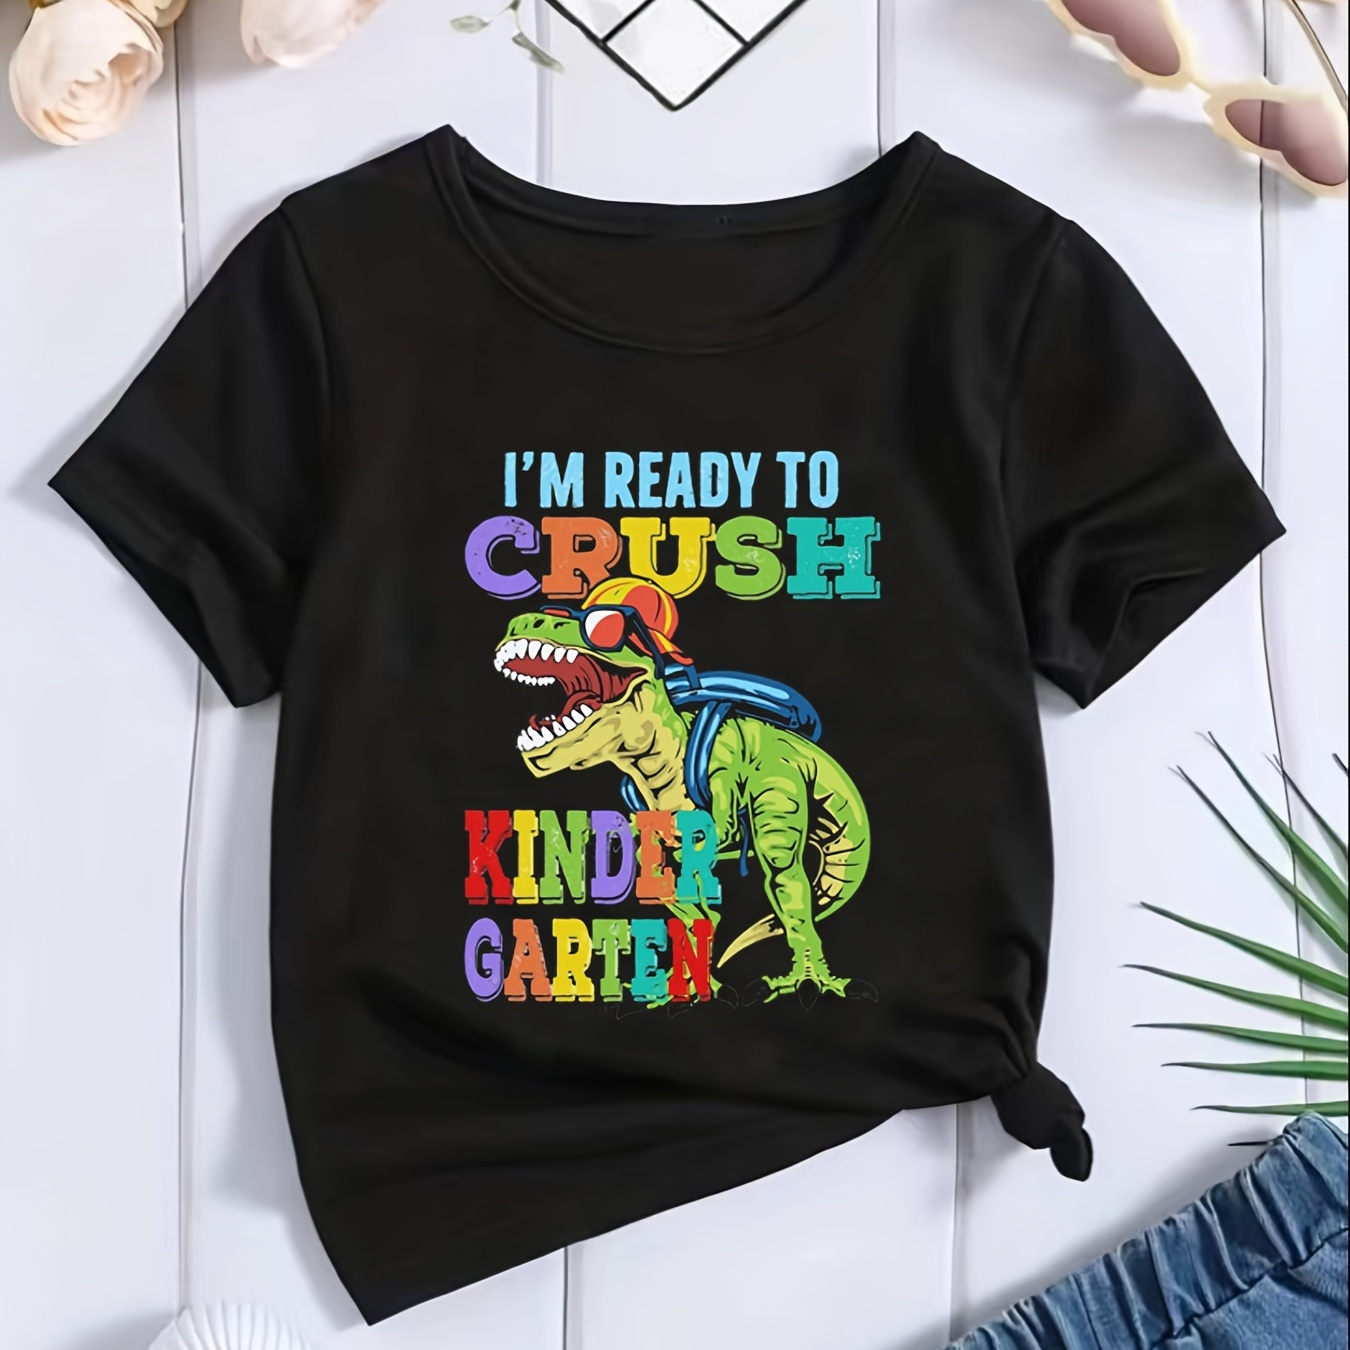 

I'm Ready To Crush Kindergarten, Boy's Dinosaur Graphic T-shirt, Casual Mid Stretch Breathable Tee, Kid's Clothing For Outdoor